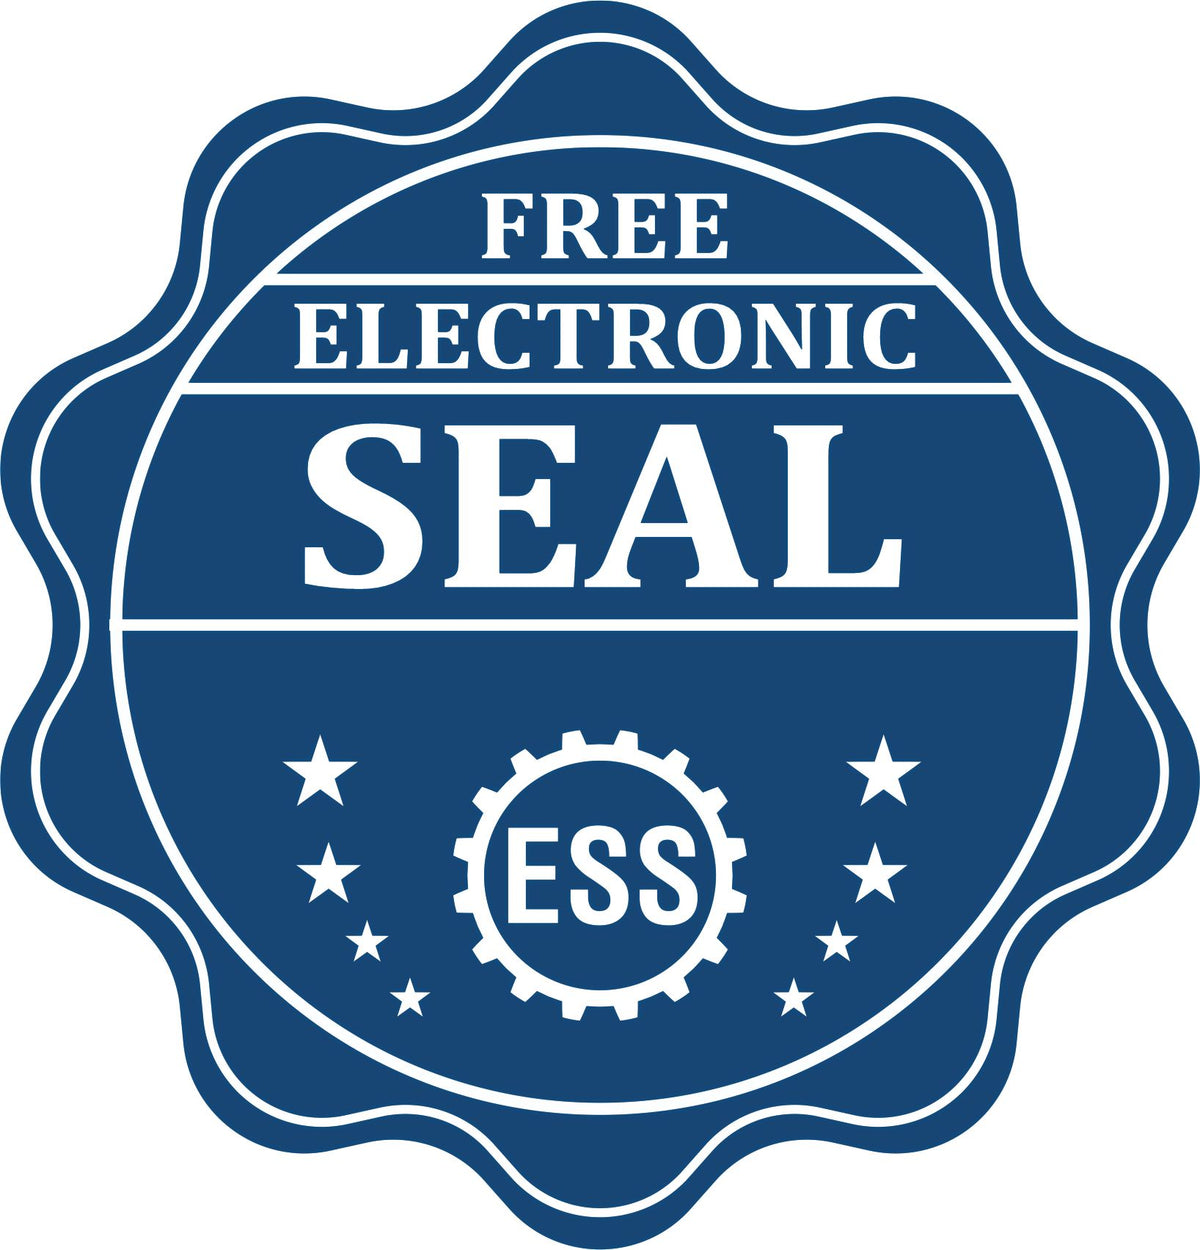 A badge showing a free electronic seal for the Heavy-Duty Idaho Rectangular Notary Stamp with stars and the ESS gear on the emblem.